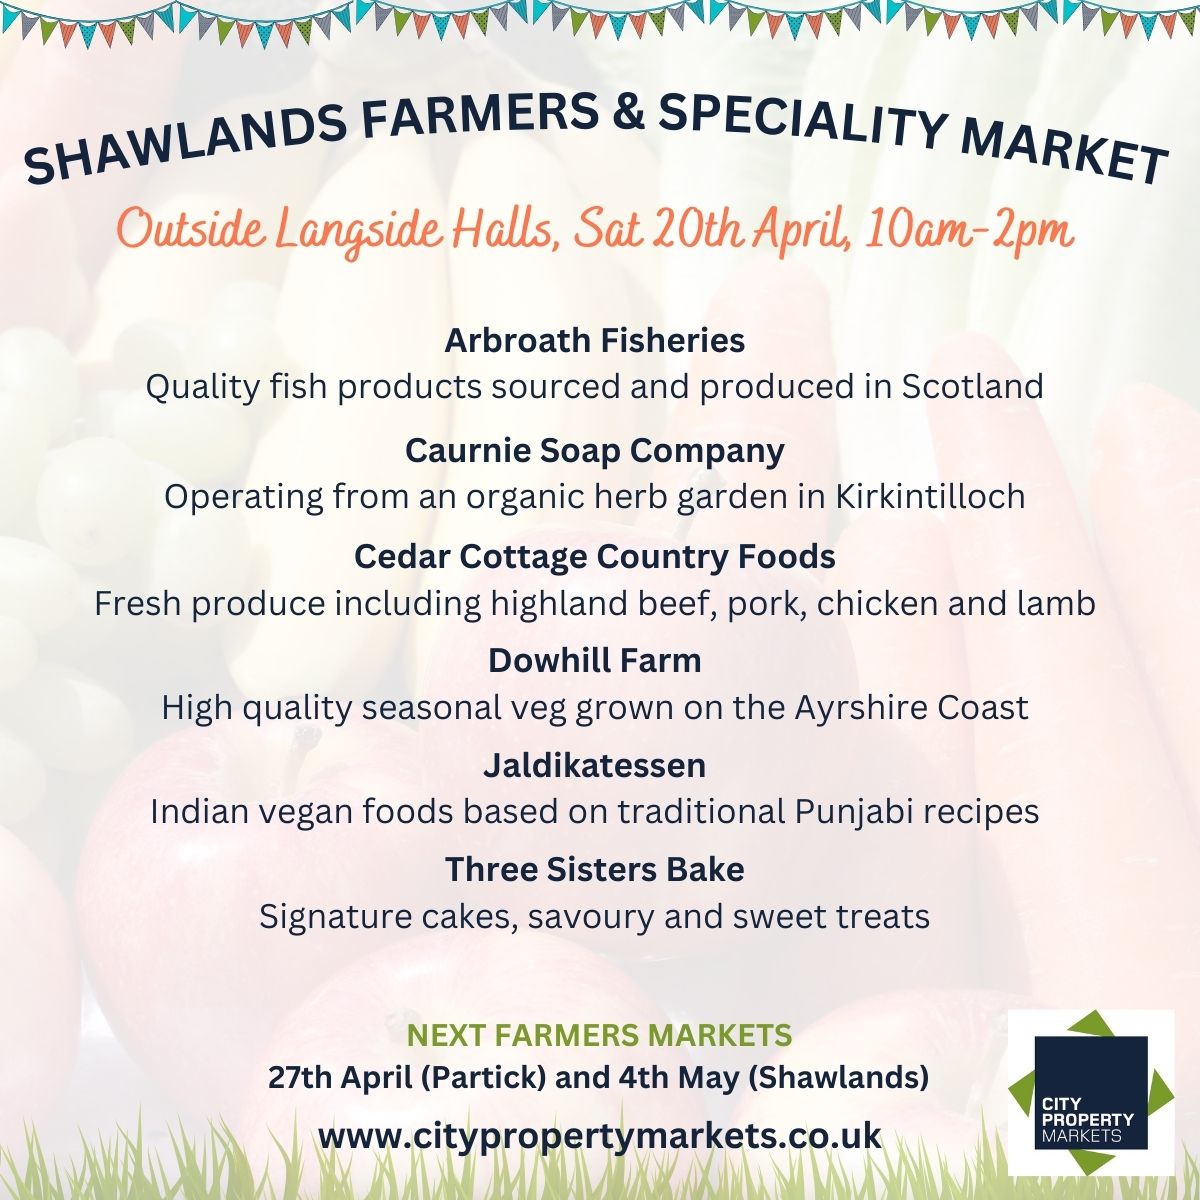 We're back in Shawlands tomorrow - catch us outside Langside Halls from 10am-2pm.
citypropertymarkets.co.uk #GlasgowMarkets 
#ShopLocal #CityPropertyMarkets #GlasgowSouthside #Shawlands #ShopLocal #WhatsOnGlasgow    

Details correct at publication, but may be subject to change.